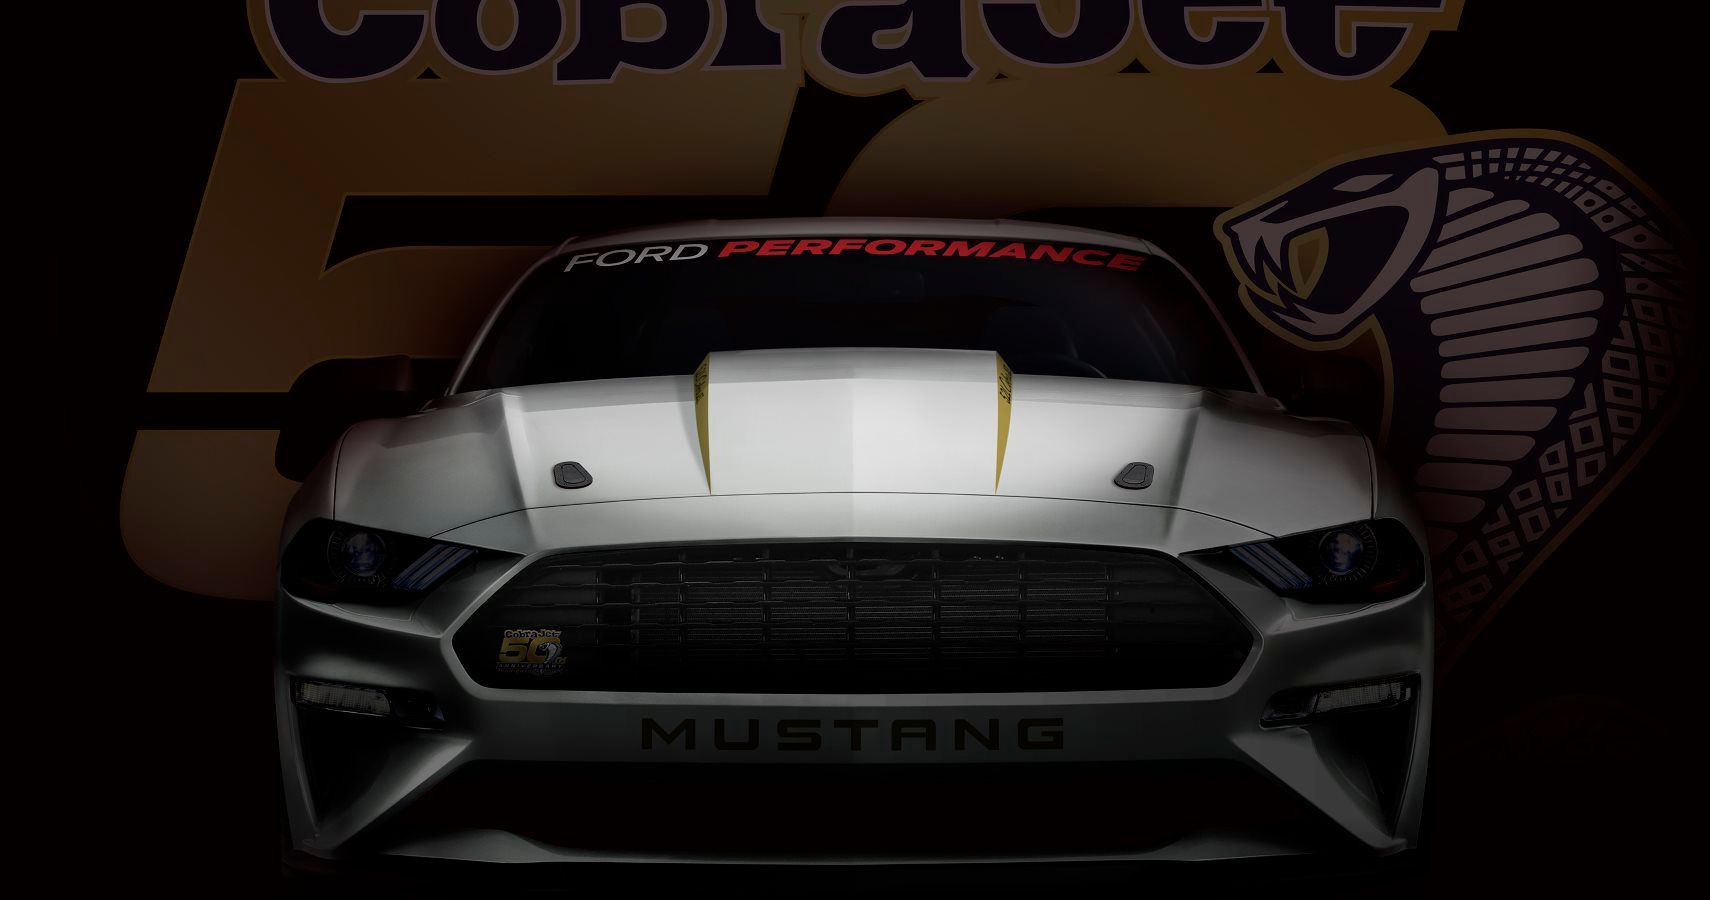 Ford Mustang Cobra Jet: Check Out The Special 50th Anniversary Edition